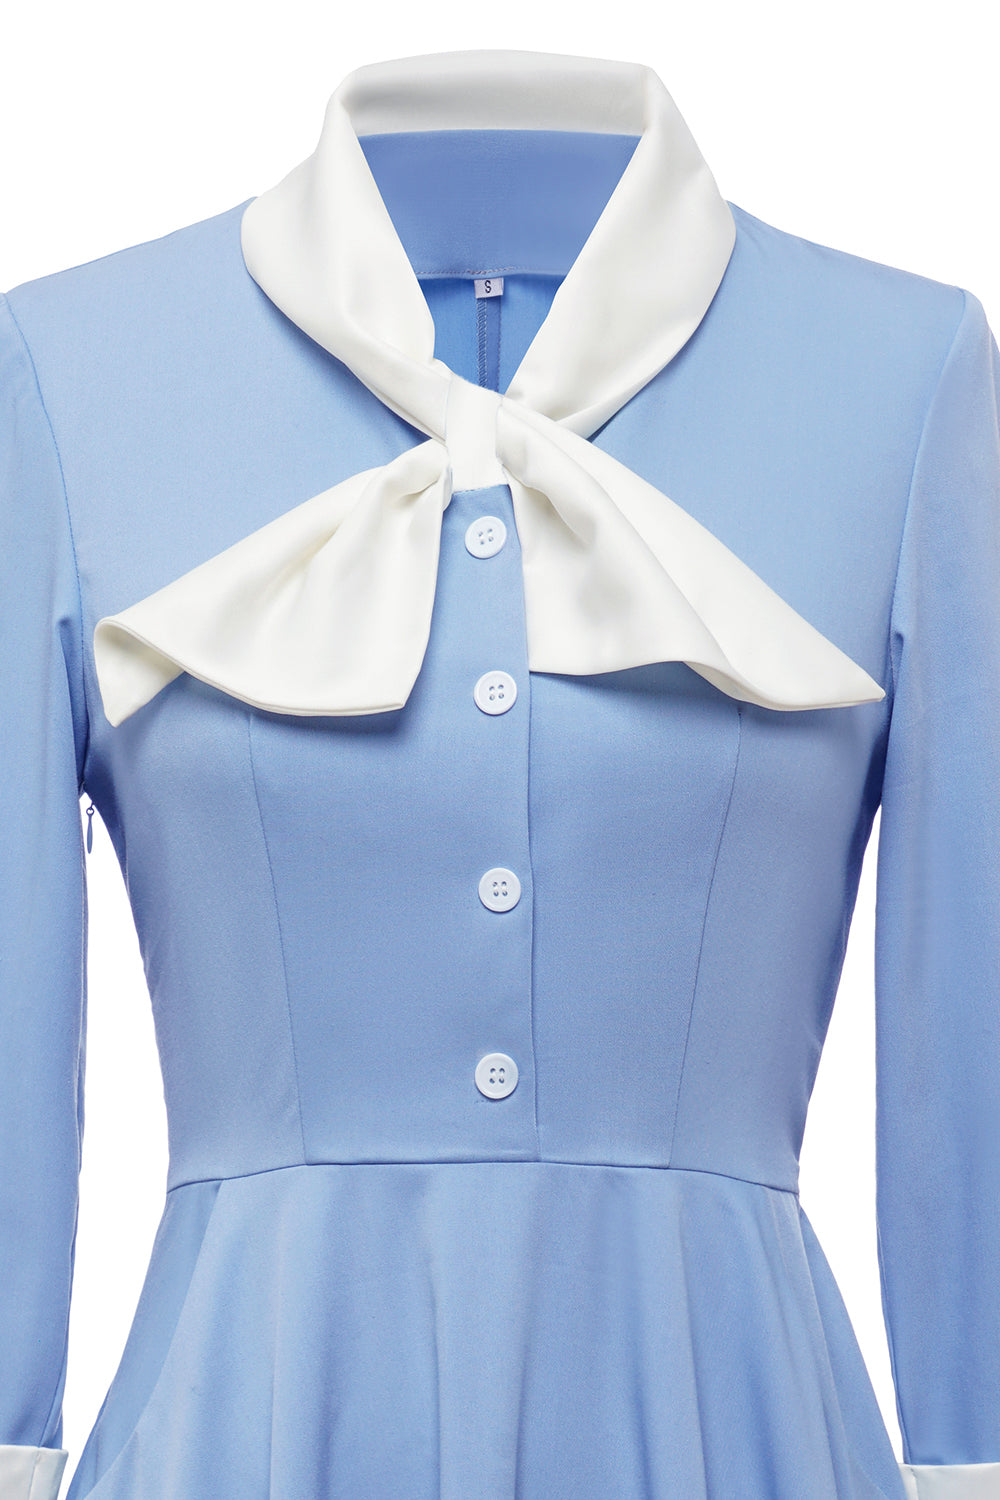 Blue Button Vintage 1950s Dress with Bowknot